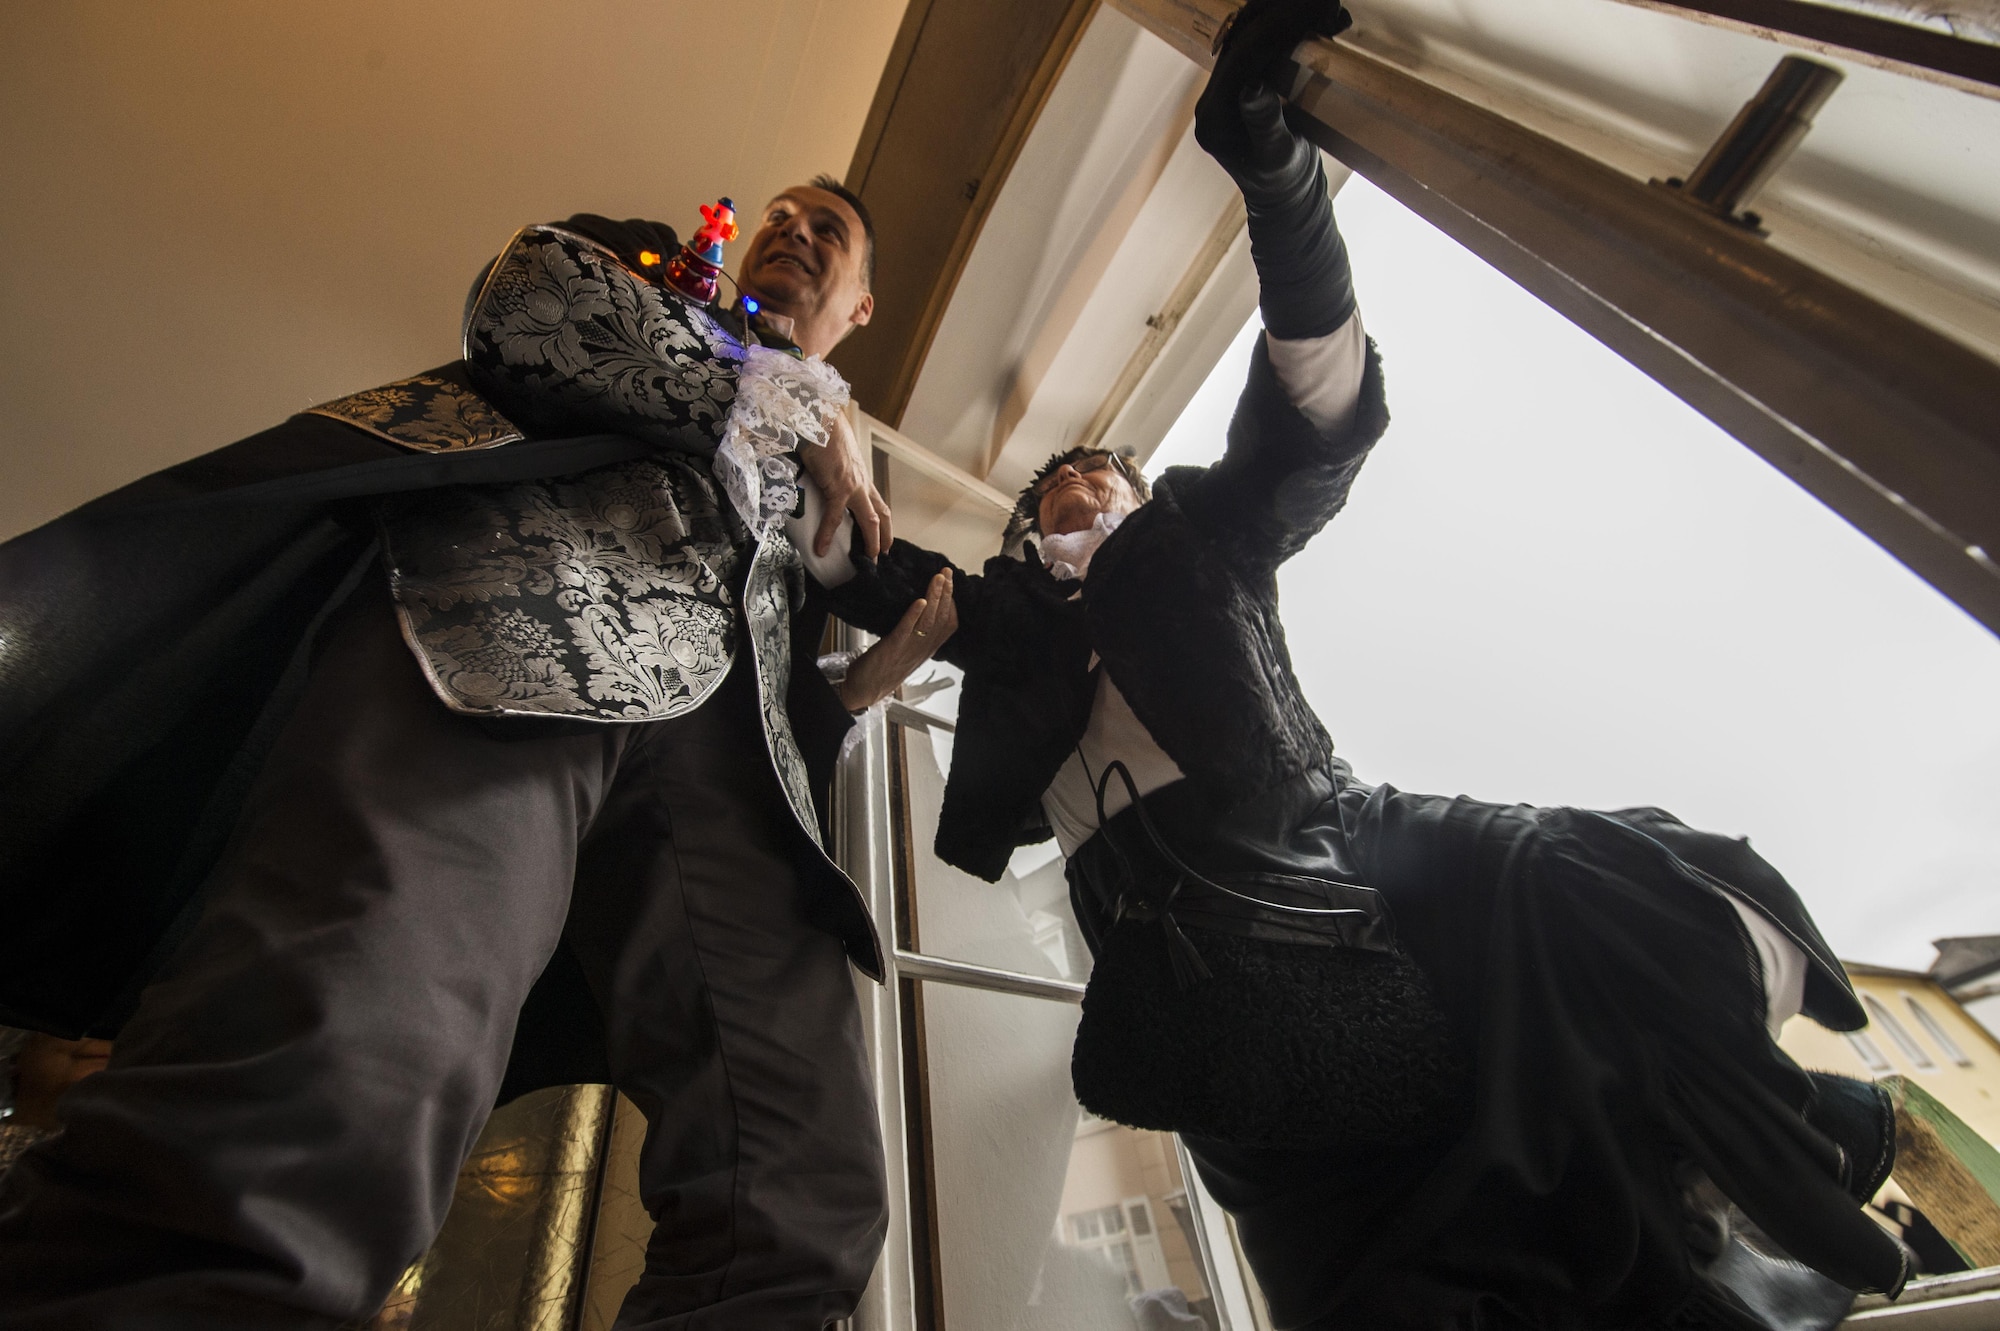 Joachim Rodenkirch, left, mayor of Wittlich, helps a local German woman through a window at city hall during a Fasching celebration in Wittlich, Germany, Feb. 23, 2017. Once the ladies have “taken over” the city hall, the celebrations begin with dancing and parading throughout the city. The traditional Fasching celebrations begin the Thursday prior to Lent at the 11th minute past the 11th hour, continue until Ash Wednesday and allow people to indulge before the Lent season. (U.S. Air Force photo by Staff Sgt. Jonathan Snyder)